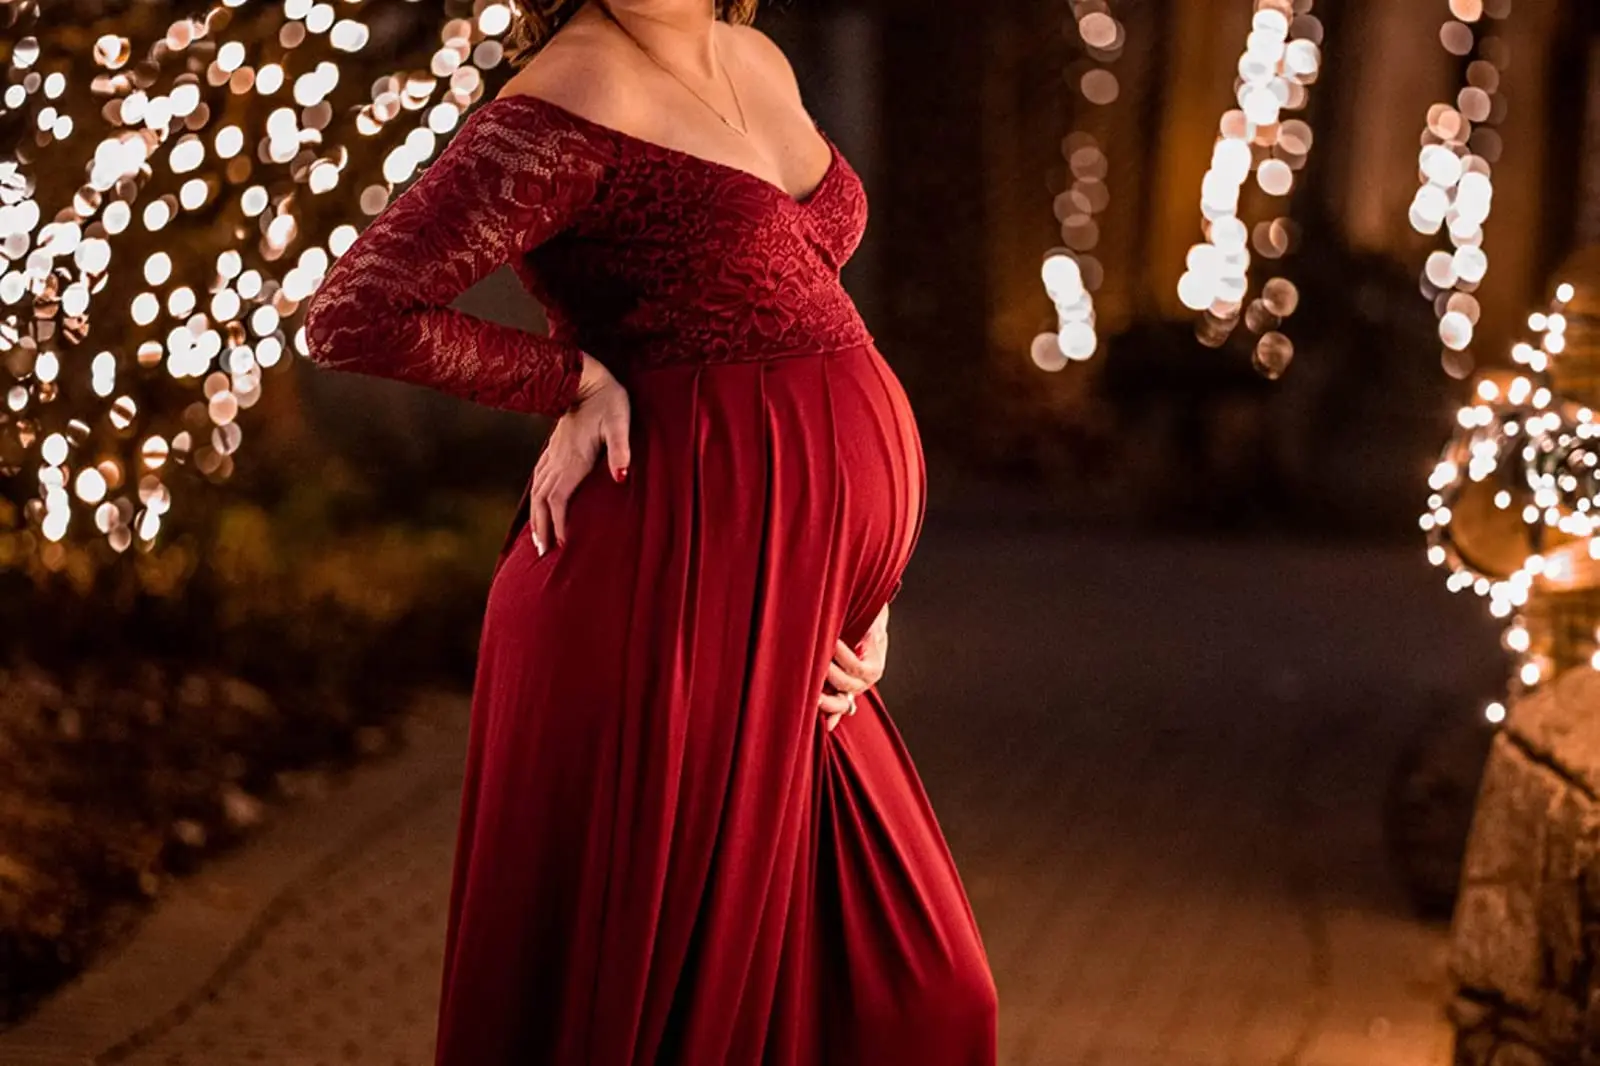 Soft Stretchy Lace Maternity Dress Pregnancy Maxi Gown for Photoshoot Baby Shower V Neck Long Sleeve Photography Dresses